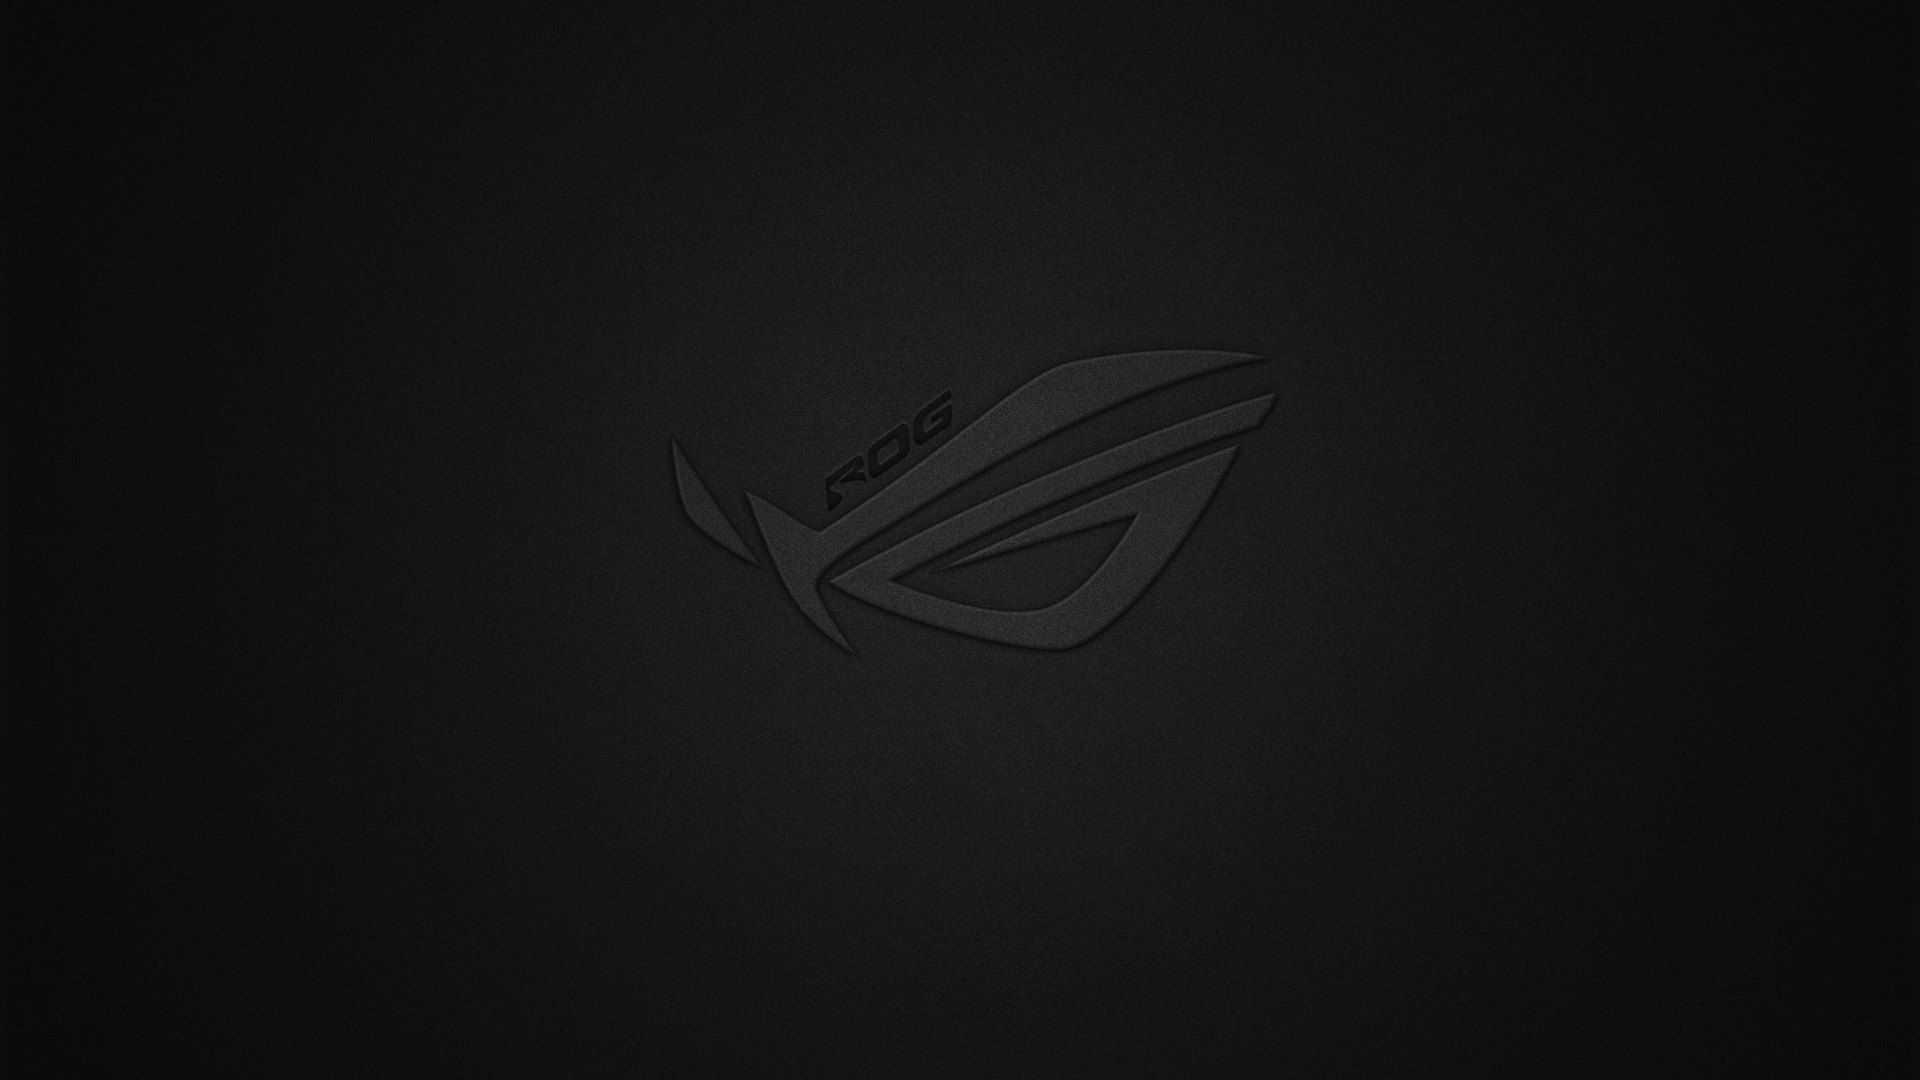 1920x1080 Asus ROG 4K Ultra HD Wallpapers Top Free Asus ROG 4K Ultra HD Backgrounds